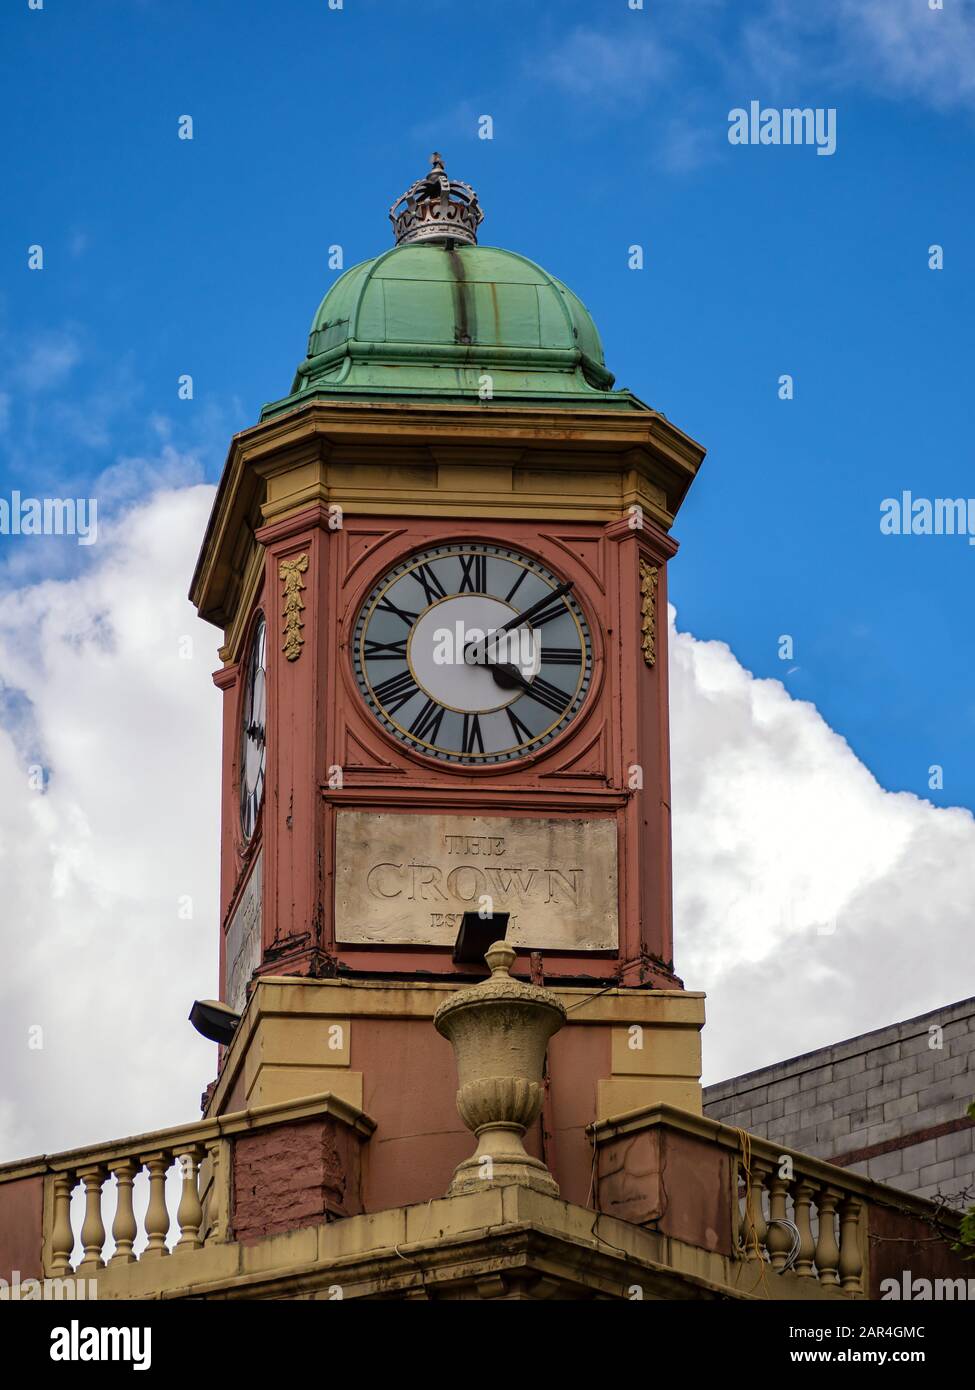 BIRMINGHAM, UK - MAY 28, 2019:  The clock tower of the Crown Inn, a Victorian public house in Broad Street Stock Photo